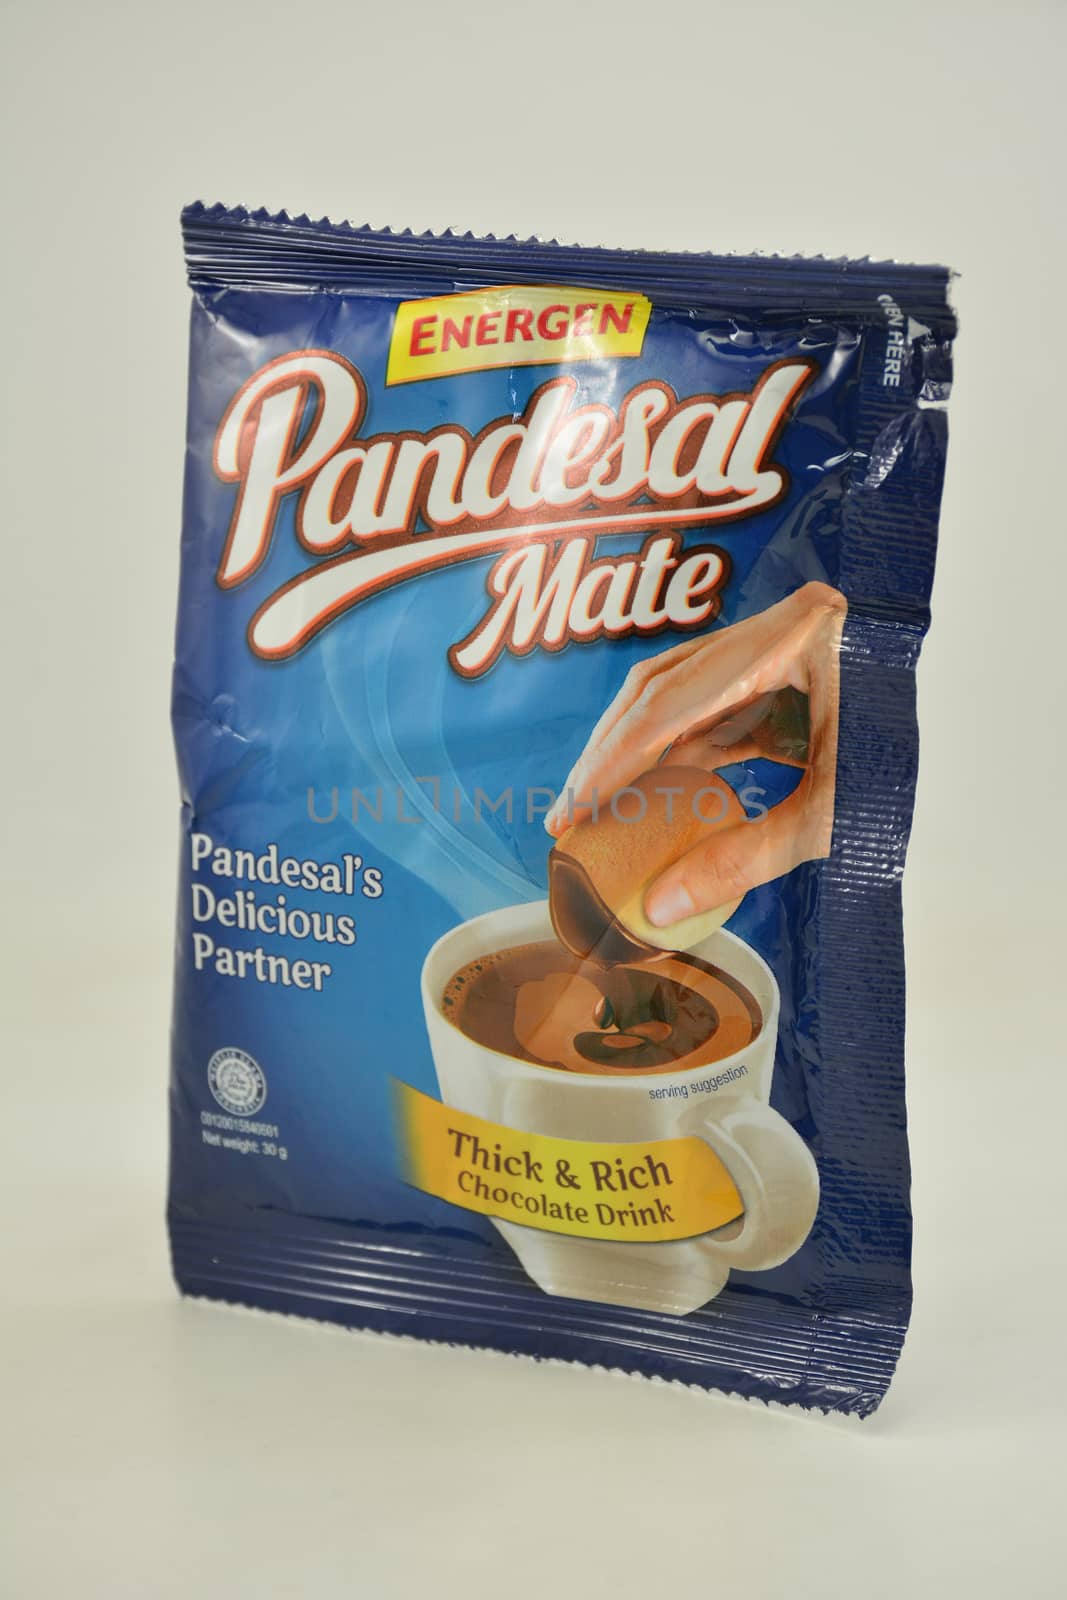 MANILA, PH - JUNE 26 - Energen pandesal mate thick and rich chocolate drink on June 26, 2020 in Manila, Philippines.